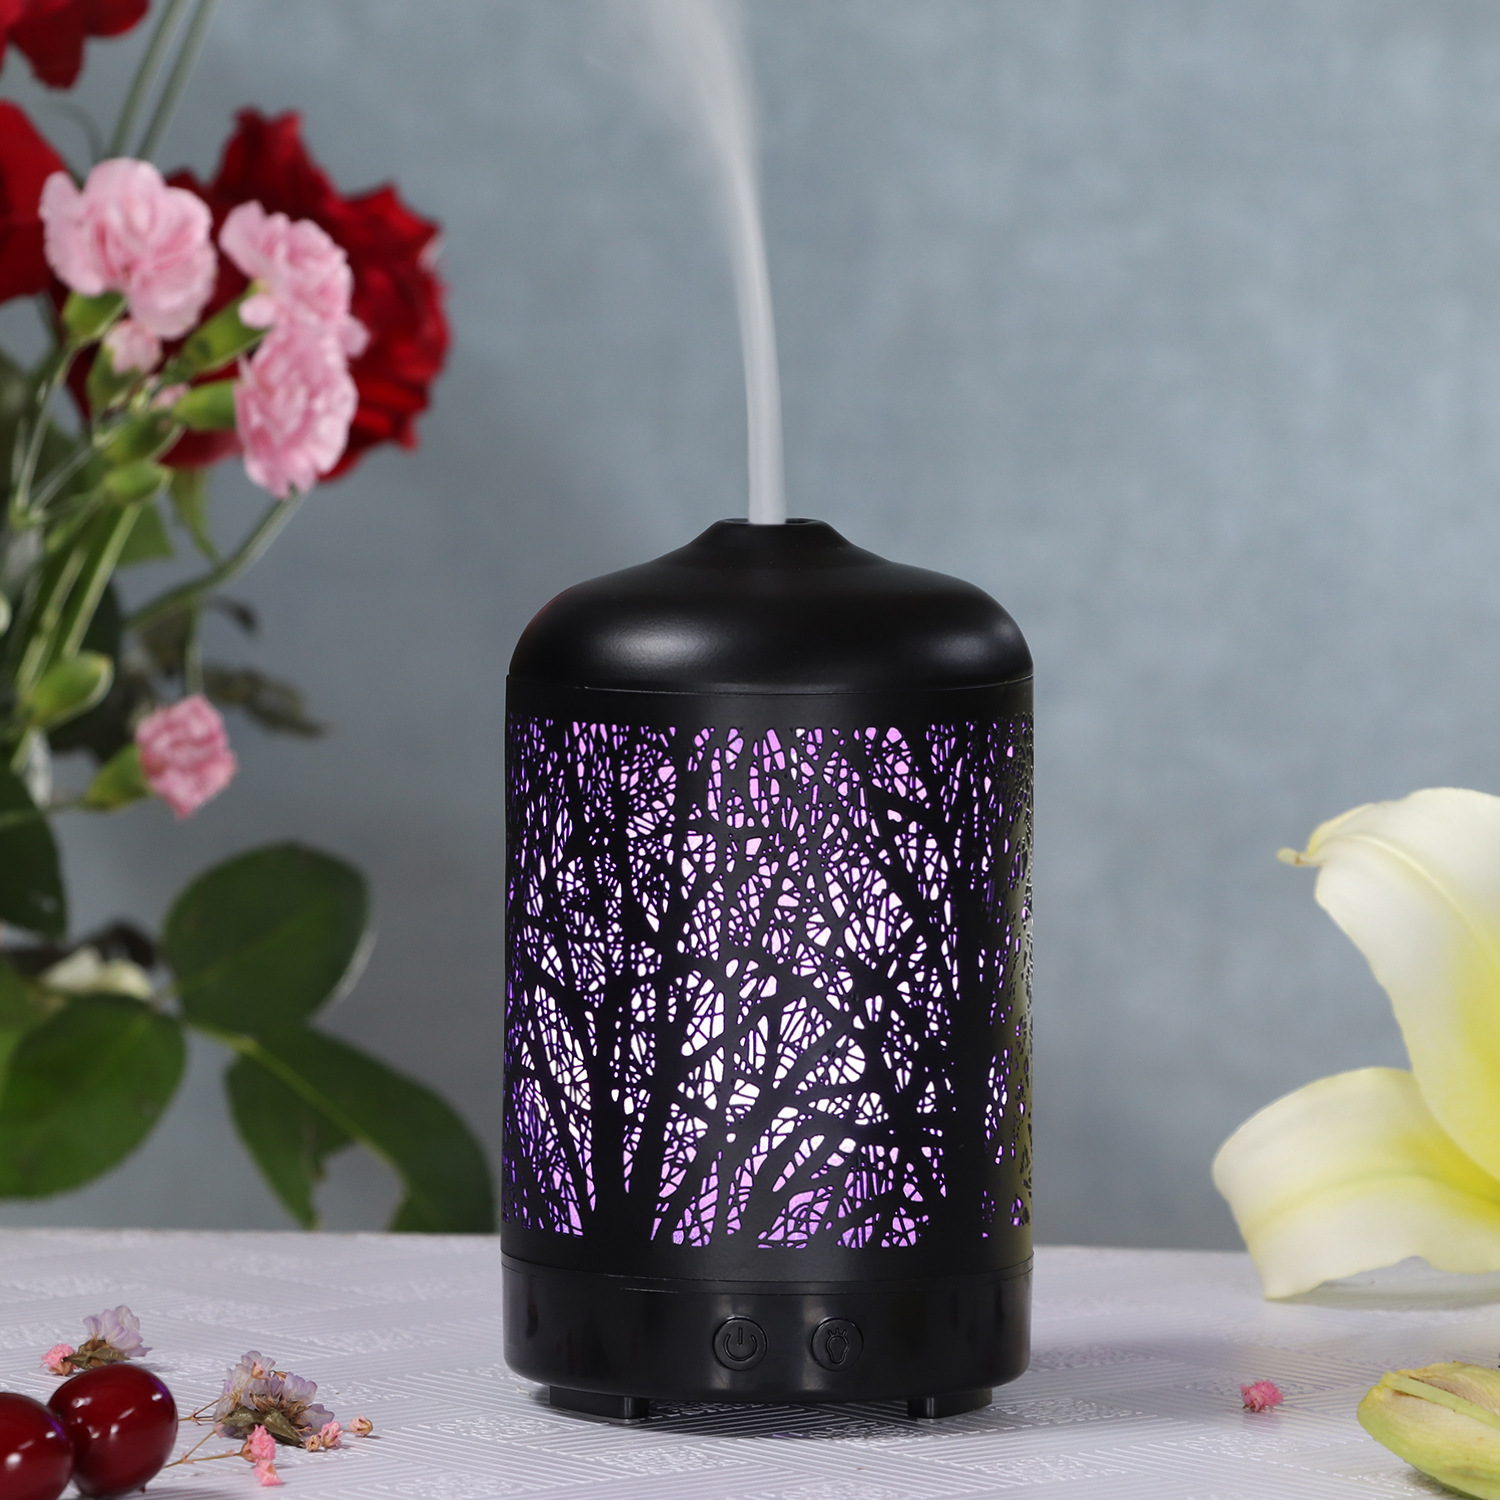 Iron Art Openwork Pattern Air Humidifier Aromatherapy Diffuser Aroma Essential Oil Nebulizer 100ml 